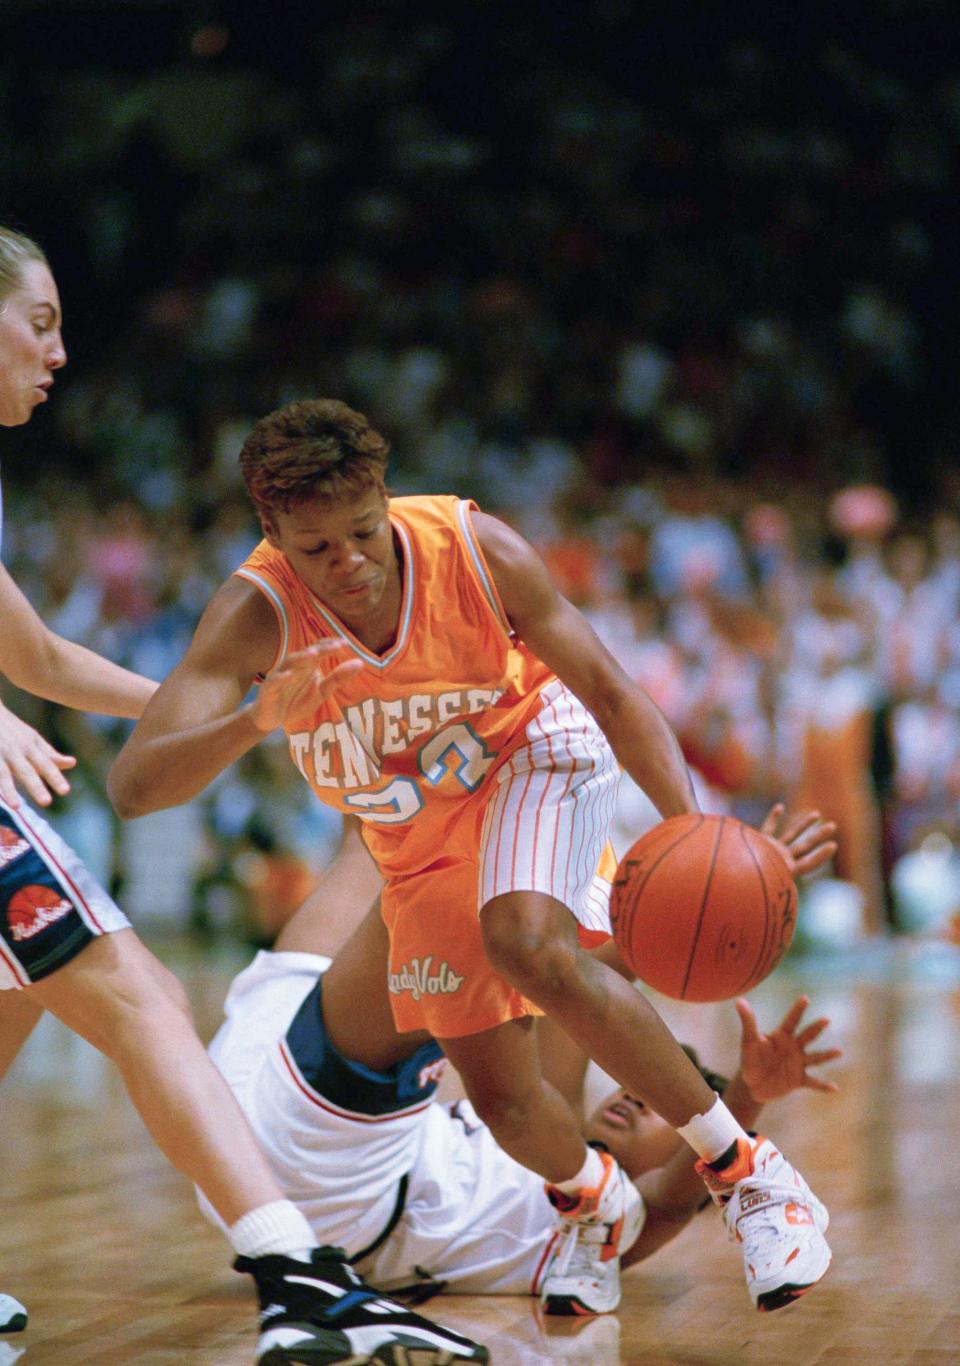 Tennessee's Nikki McCray races down the court after stealing the ball from Connecticut's Jamelle Elliott in the first half of their NCAA Women's Final Four championship game in Minneapolis, April 2, 1995. (AP Photo/Bob Child)